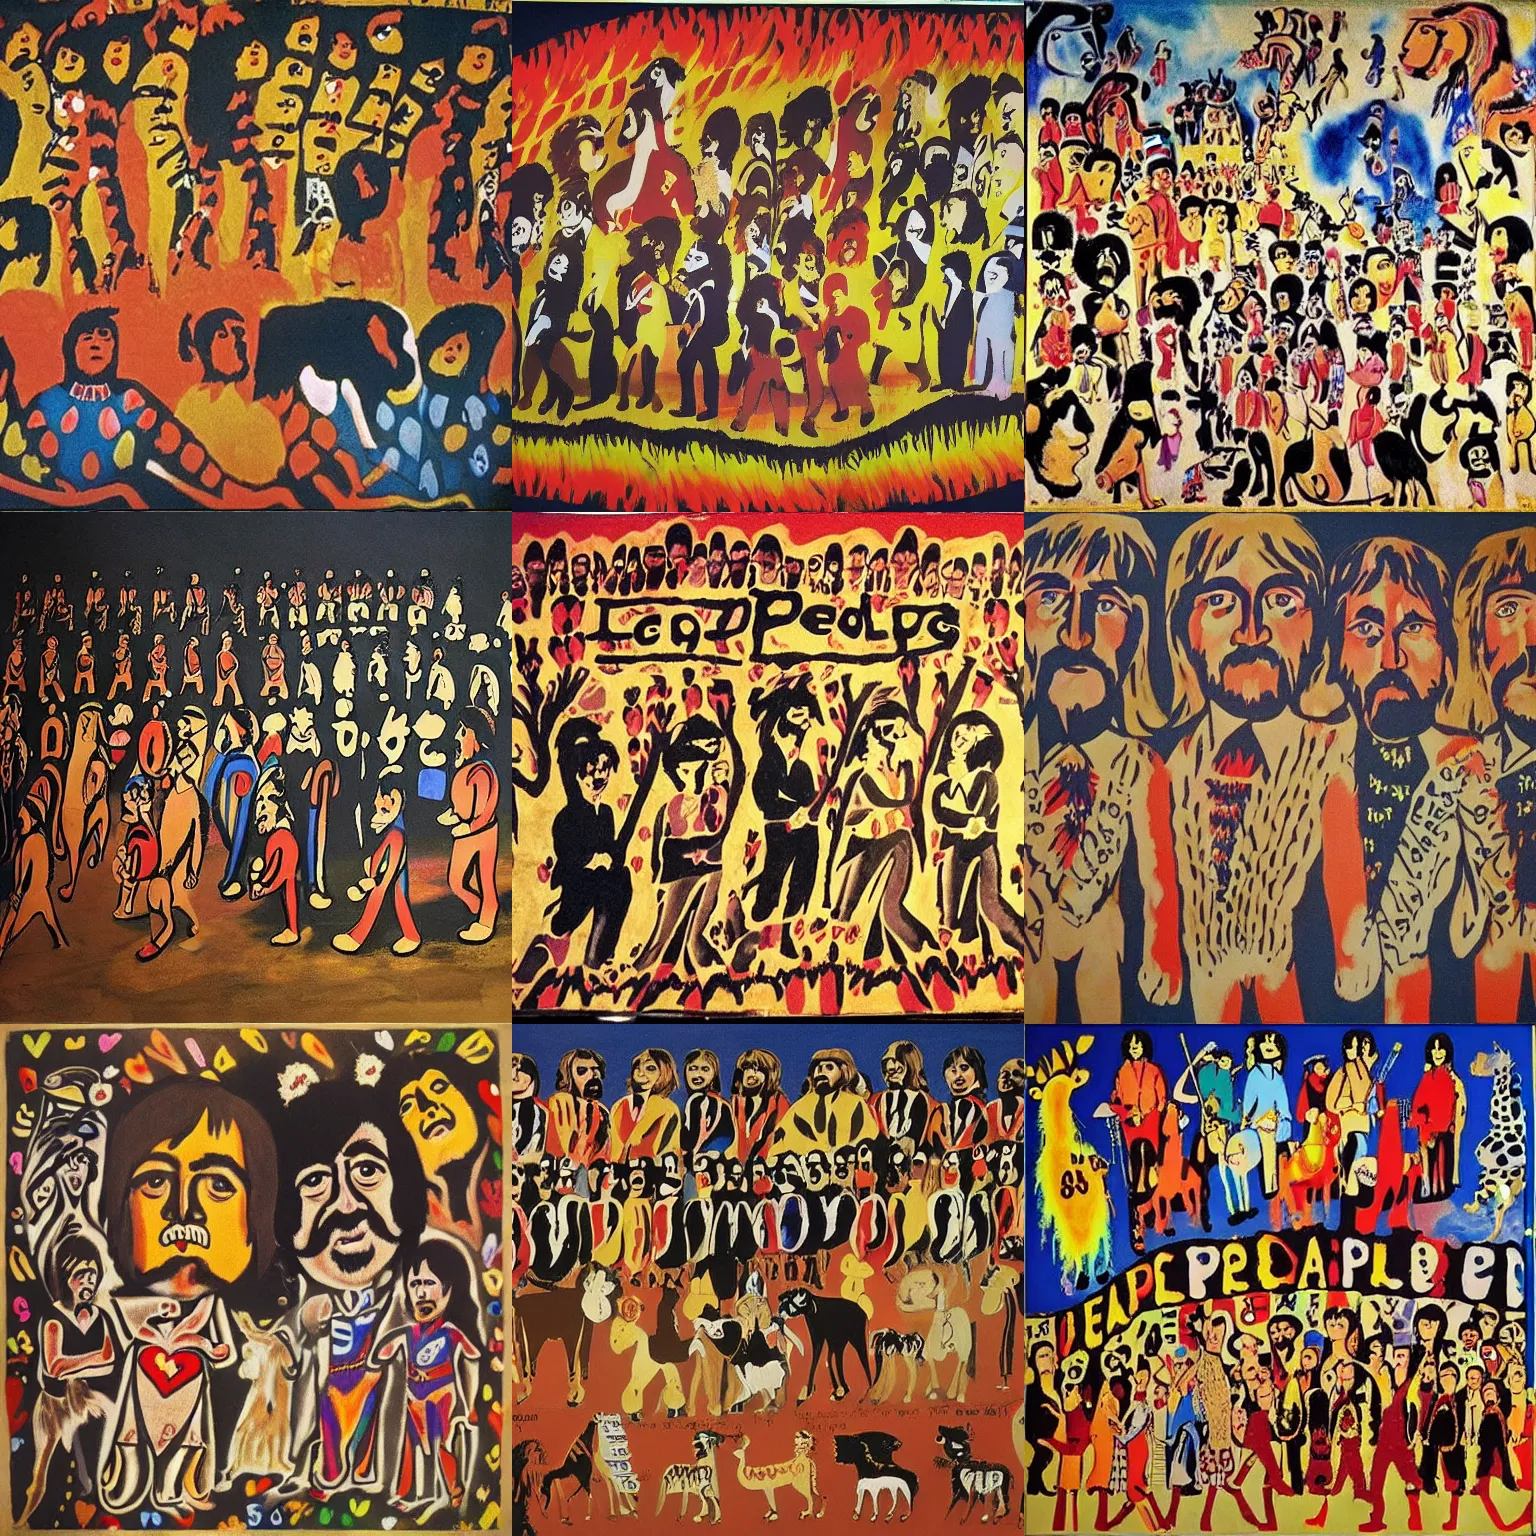 Prompt: lascaux cave painting of the beatles sgt pepper's!!! lauscaux cave painting!!! lonely hearts club band ( 1 9 6 7 ) album cover!!!!!!!!!!!!!!!!!!!!!!!!!!!!!! lascaux cave painting